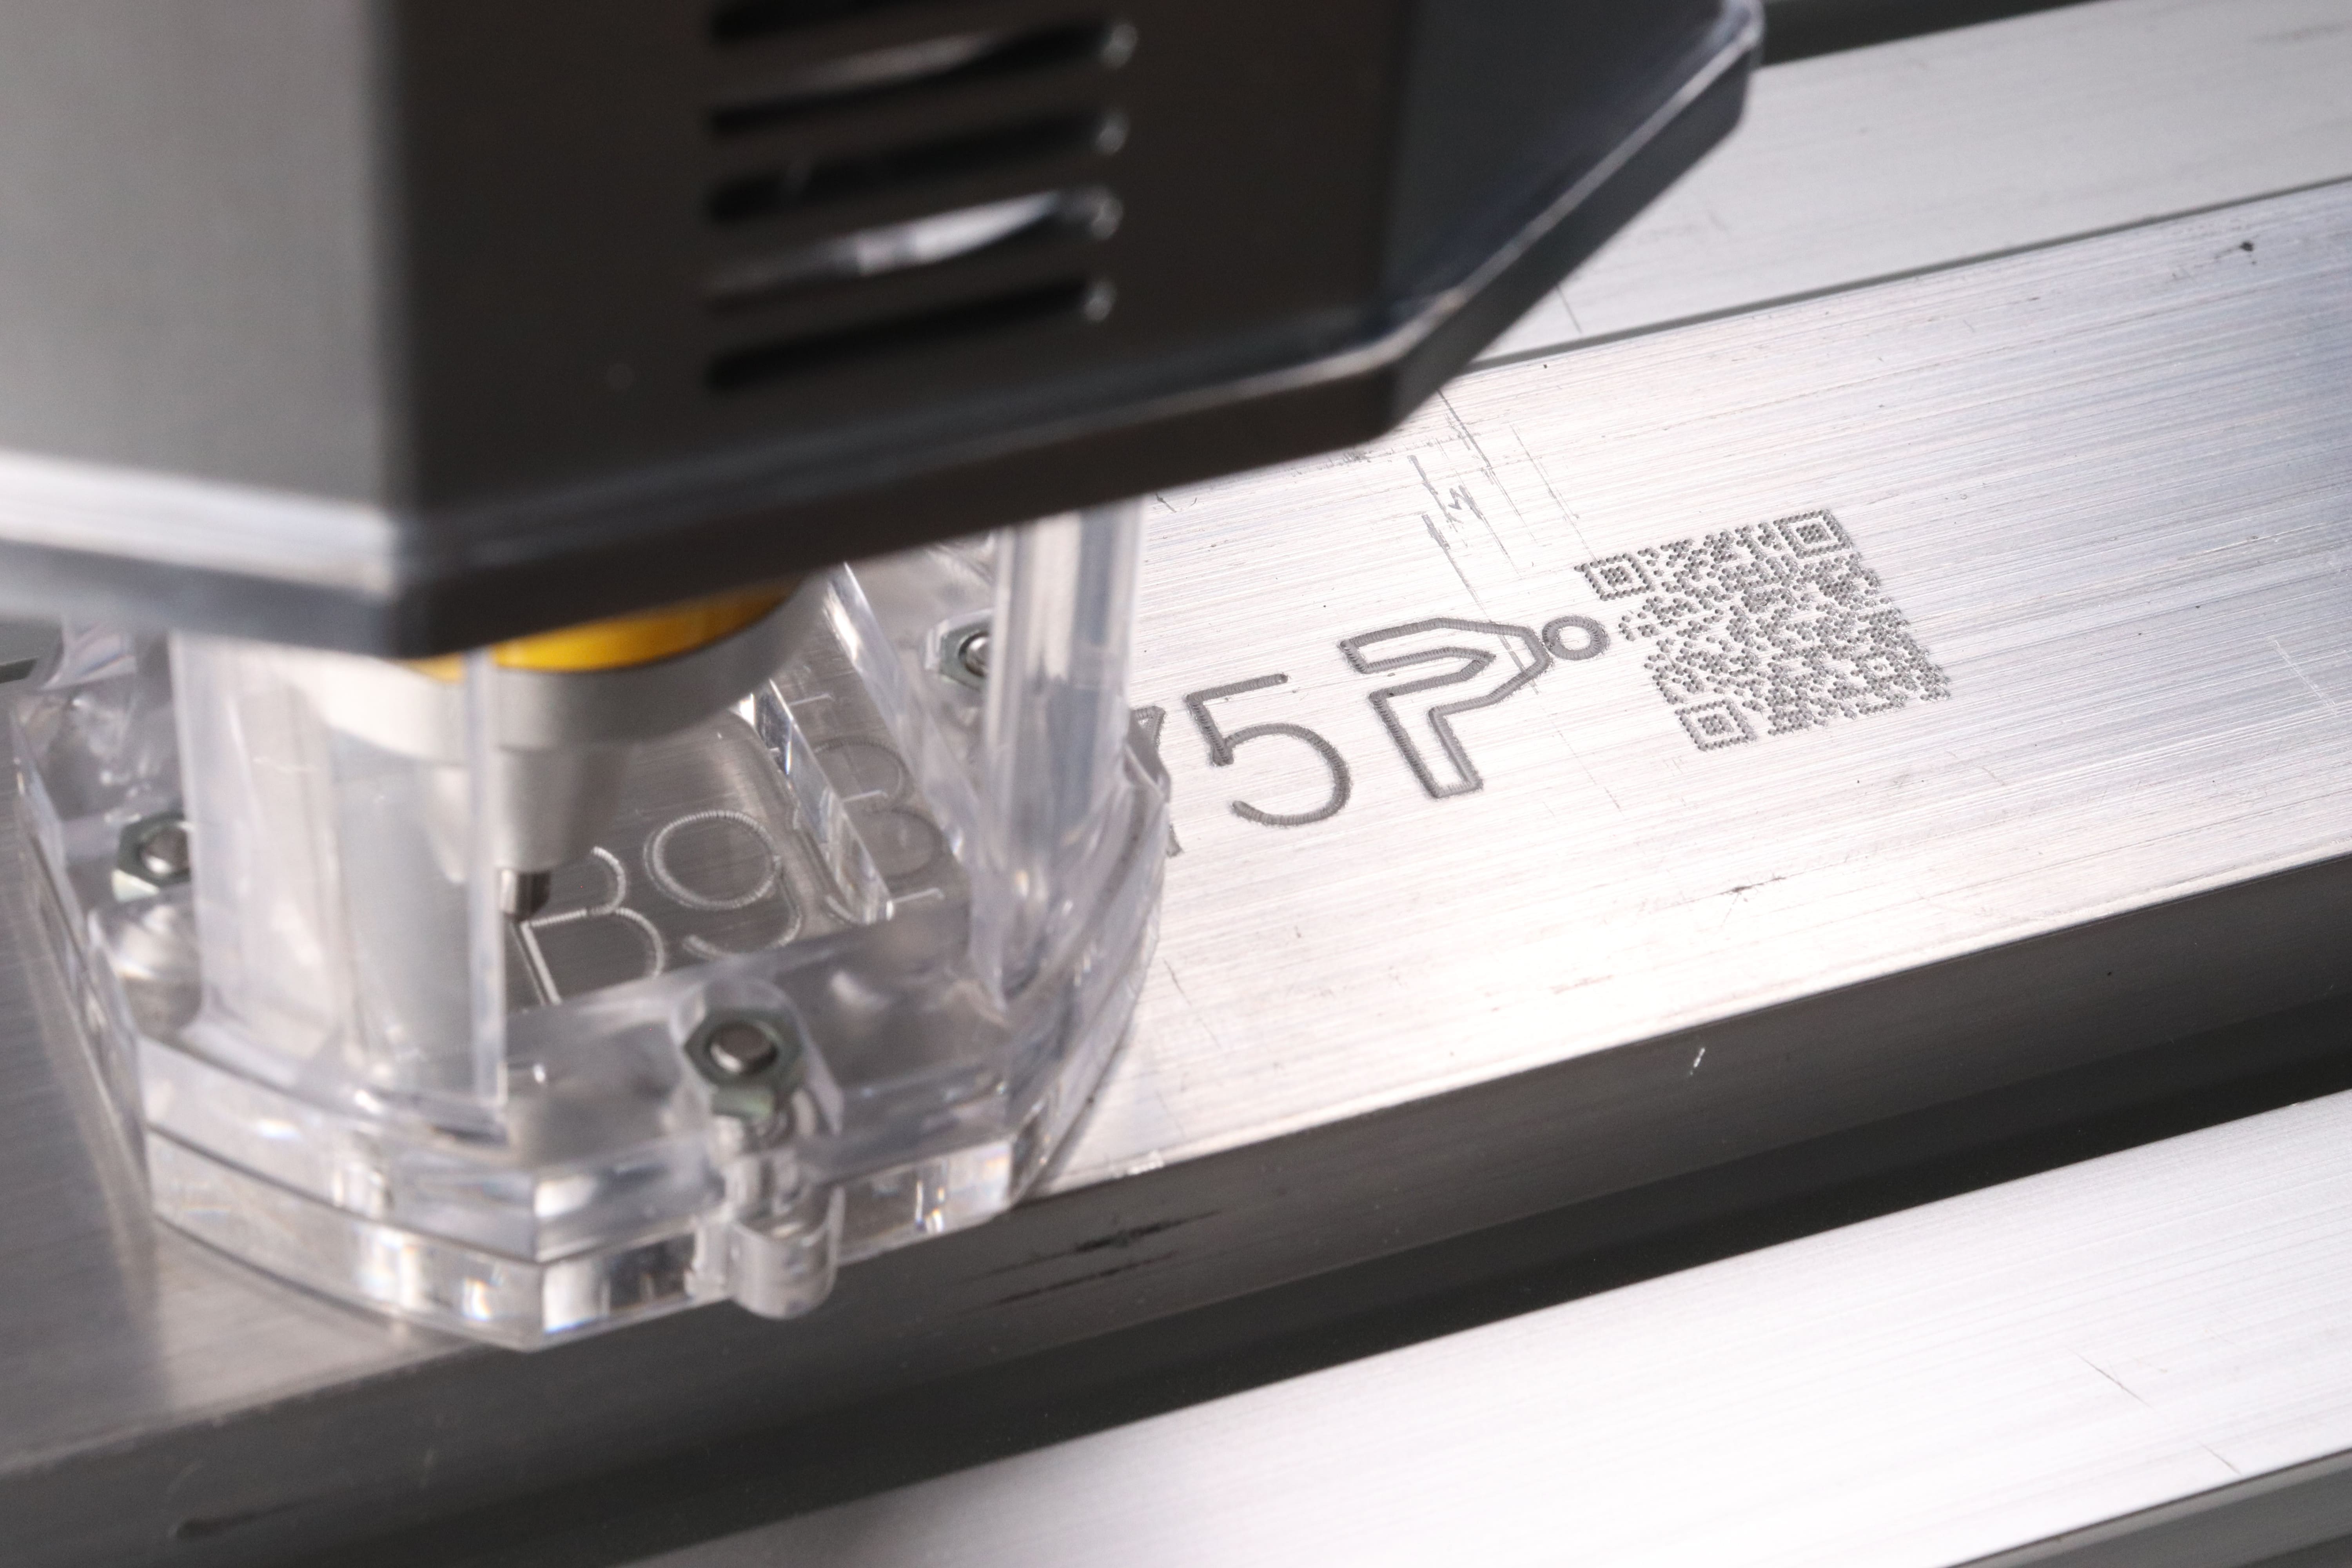 Image of text and QR code engraved by the Patmark robot from the Patmark series.